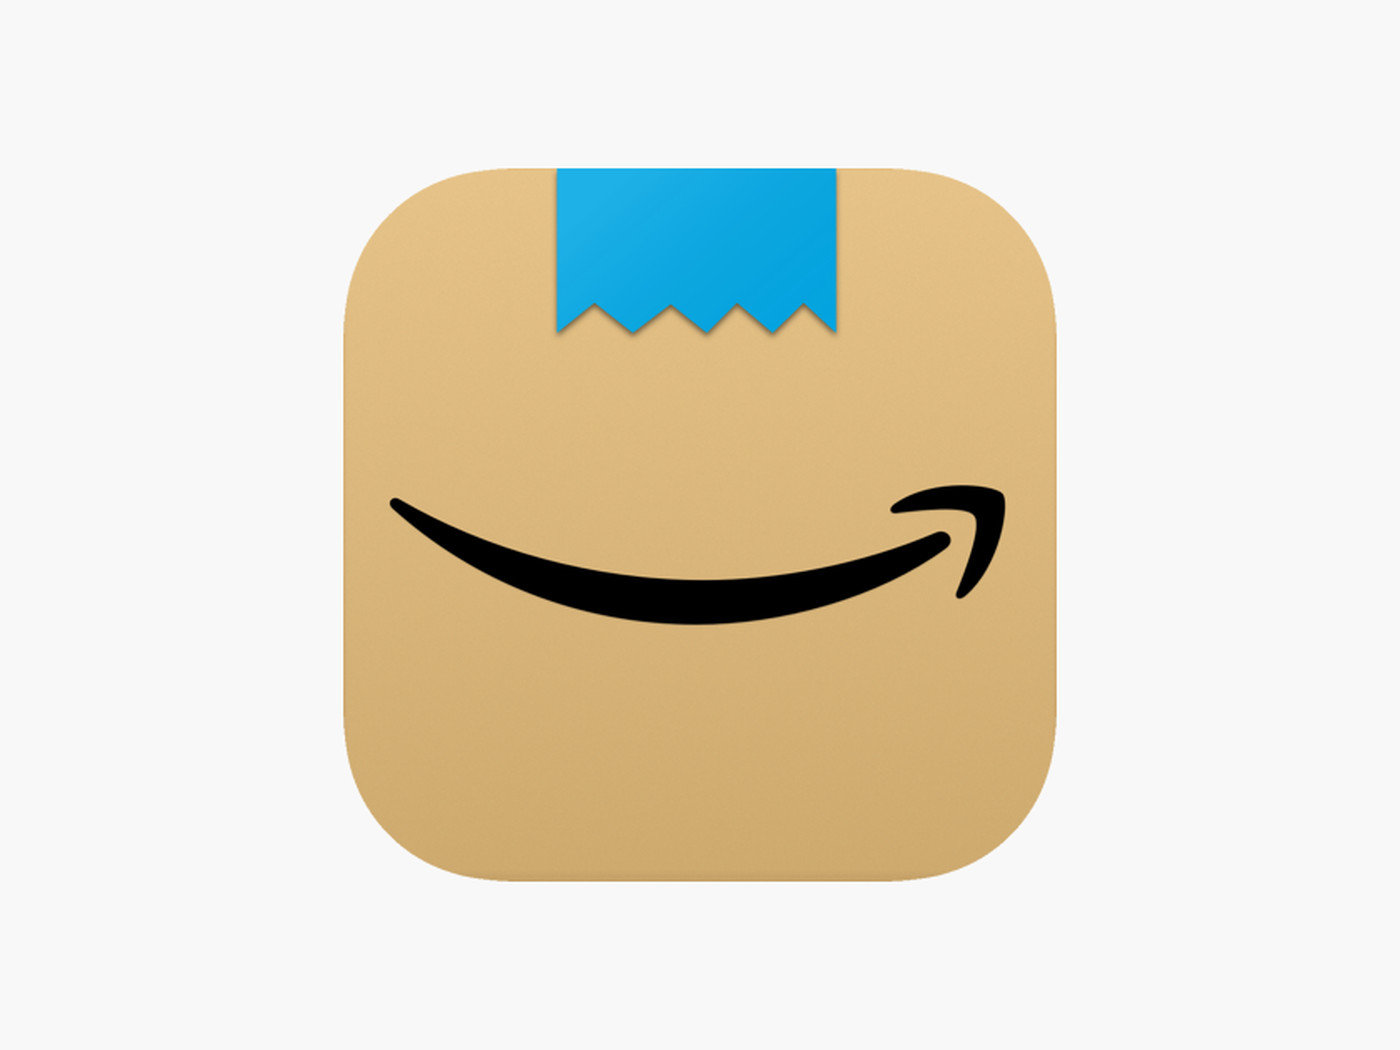 $10 off $20 1st app order & $5 off $10 2nd app order using the Amazon Shopping App  YMMV /Targeted